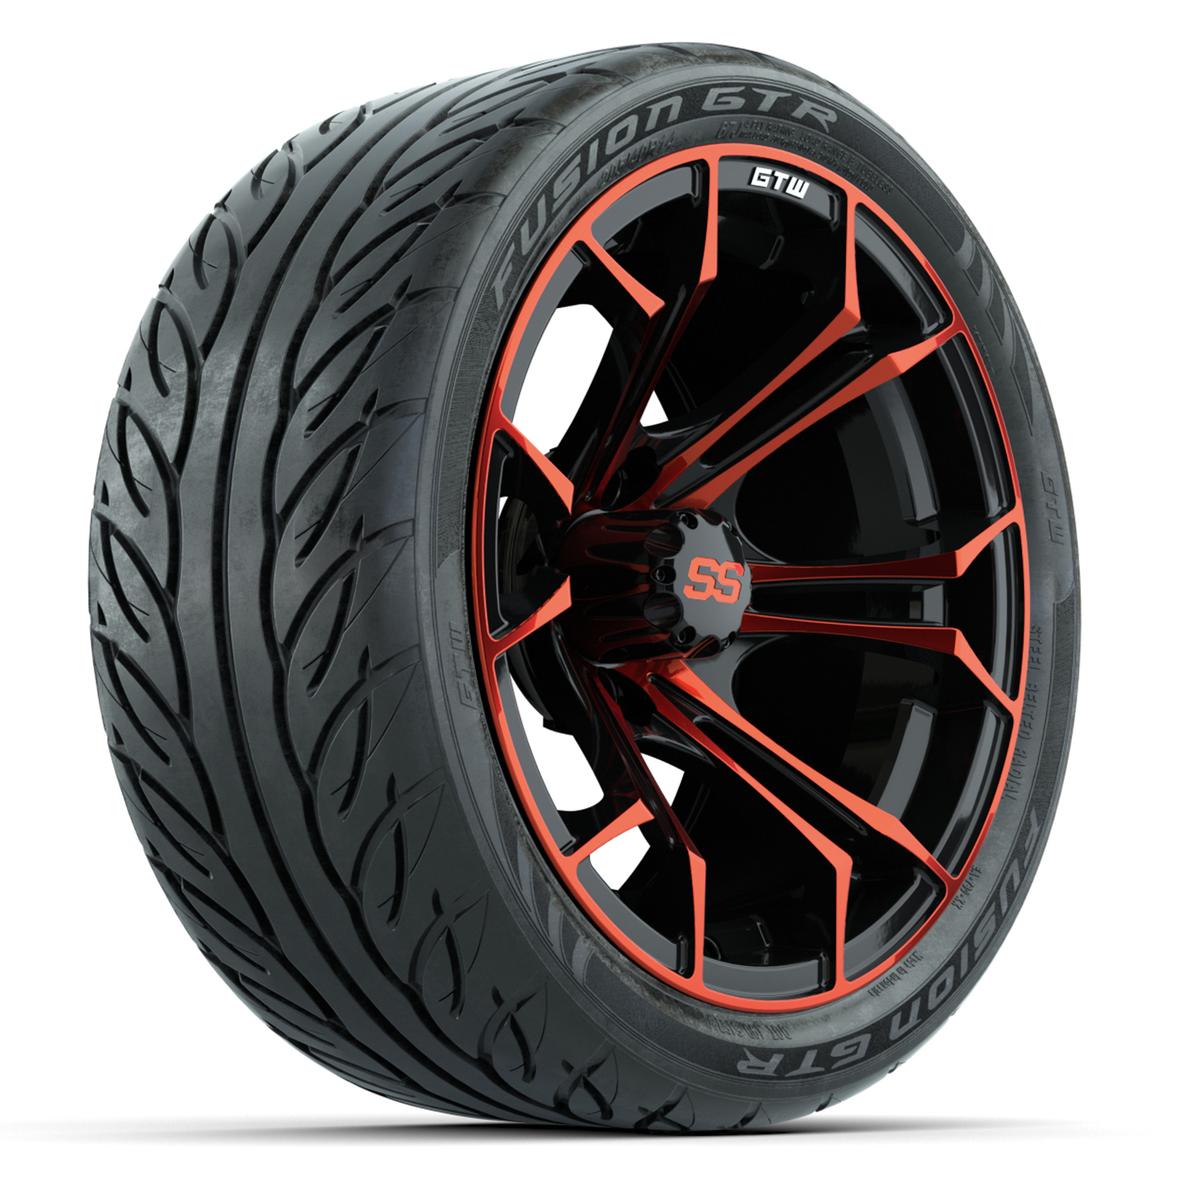 GTW Spyder Red/Black 14 in Wheels with 205/40-R14 Fusion GTR Street Tires – Full Set